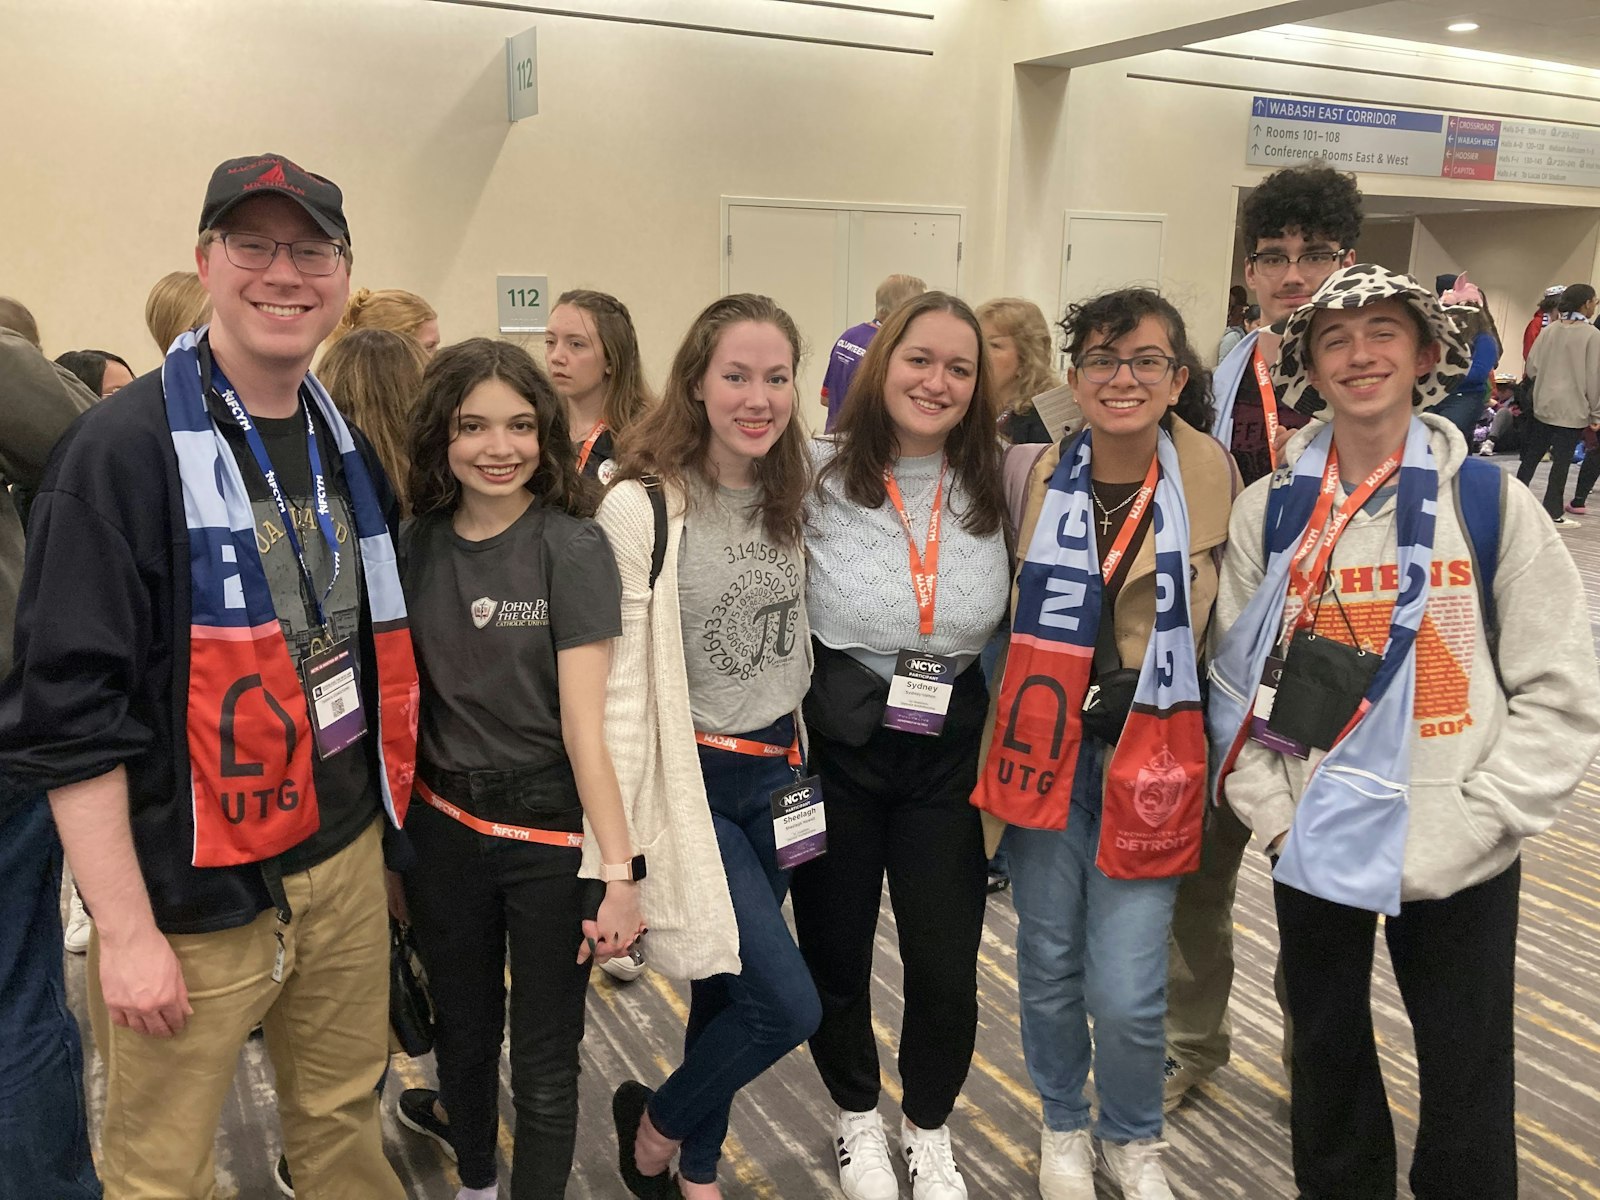 Young people from St. Anastasia Parish in Troy pose for a photo during a break in the action at the National Catholic Youth Conference. (Courtesy photo)